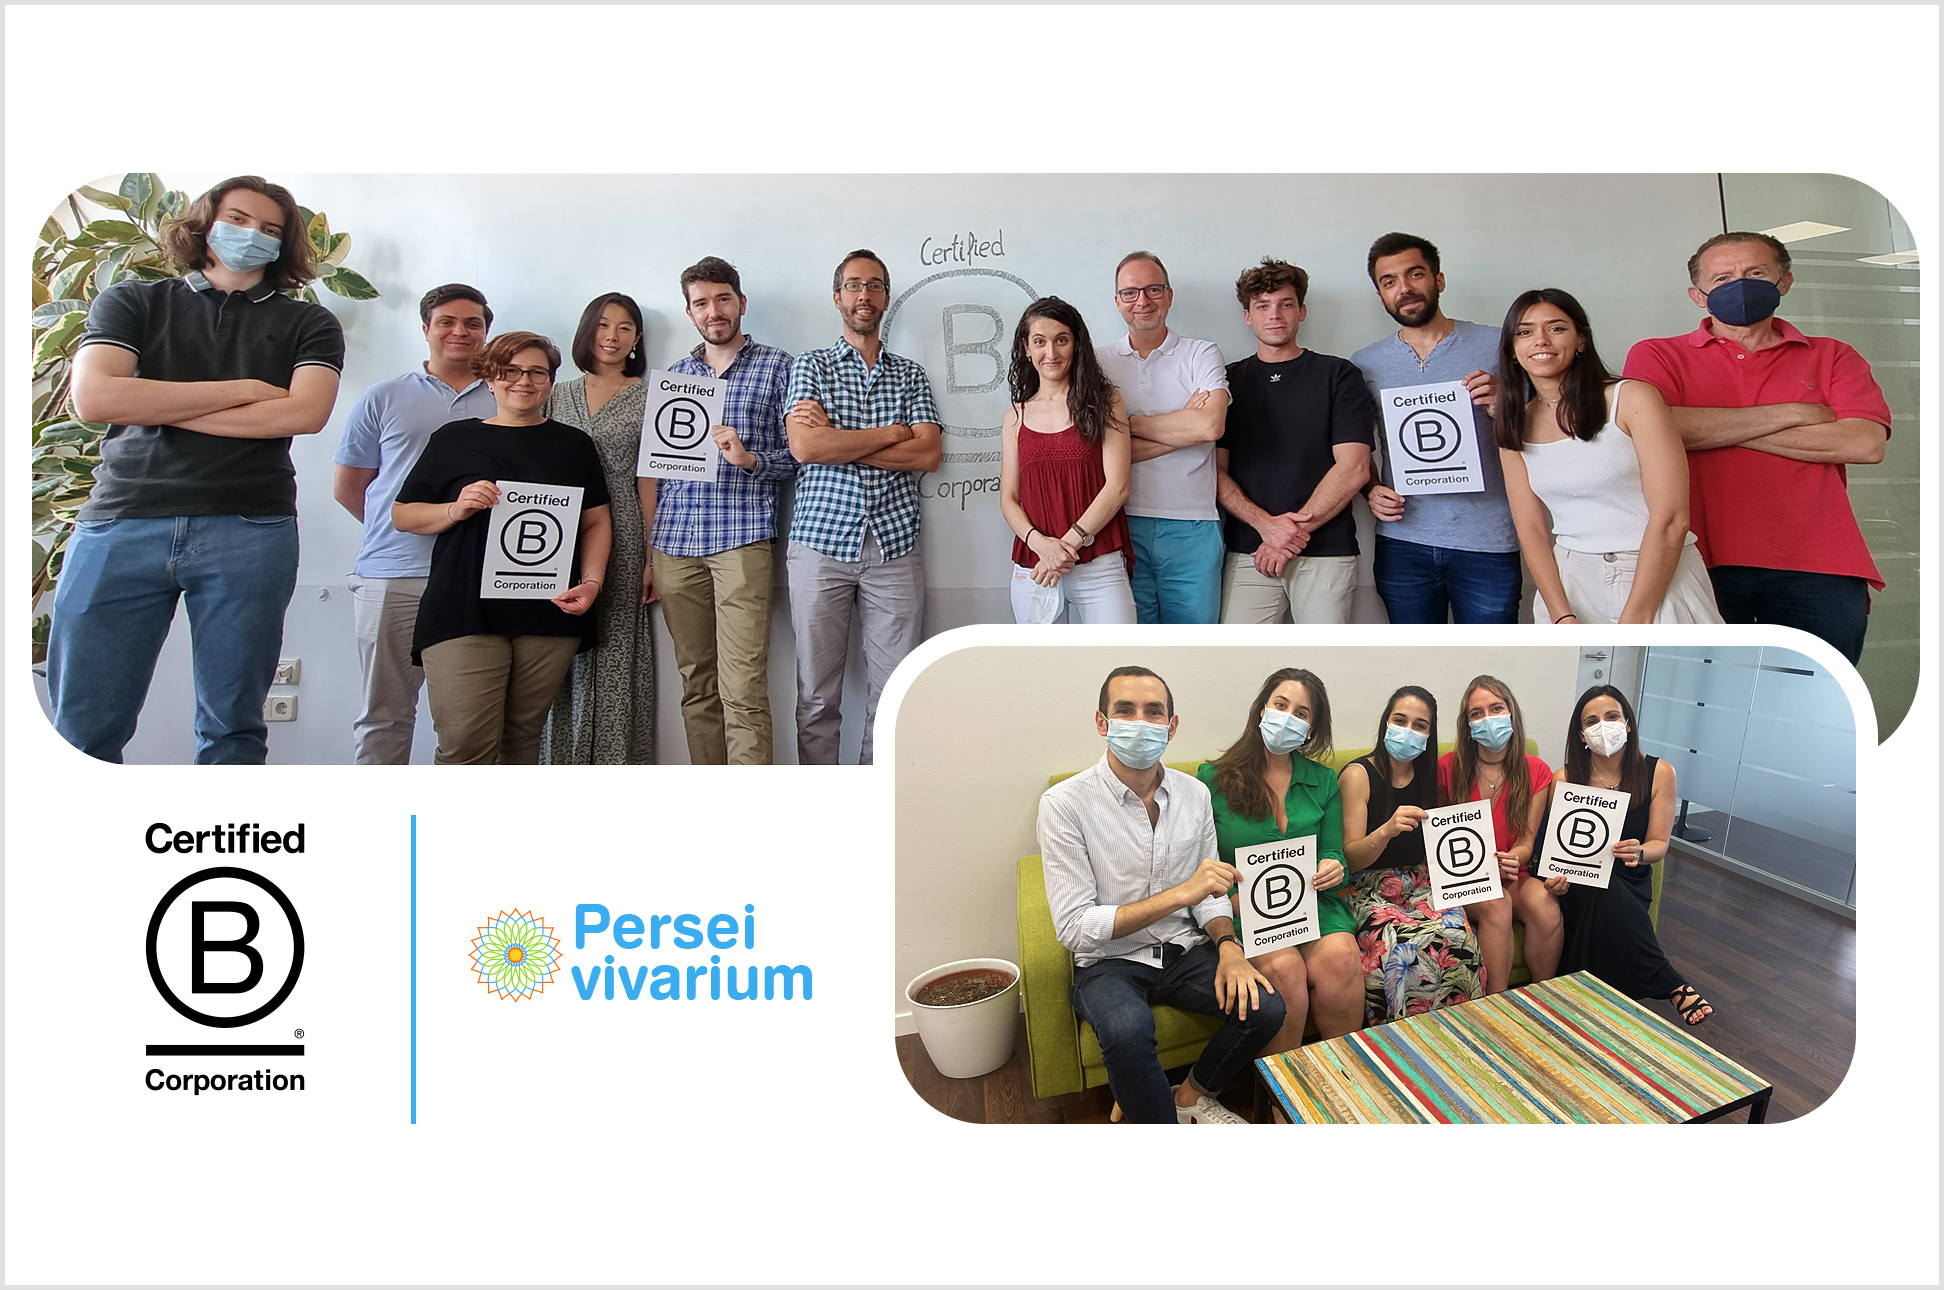 Our company, Persei vivarium, has obtained B-Corp certification, meeting the highest standards of social commitment